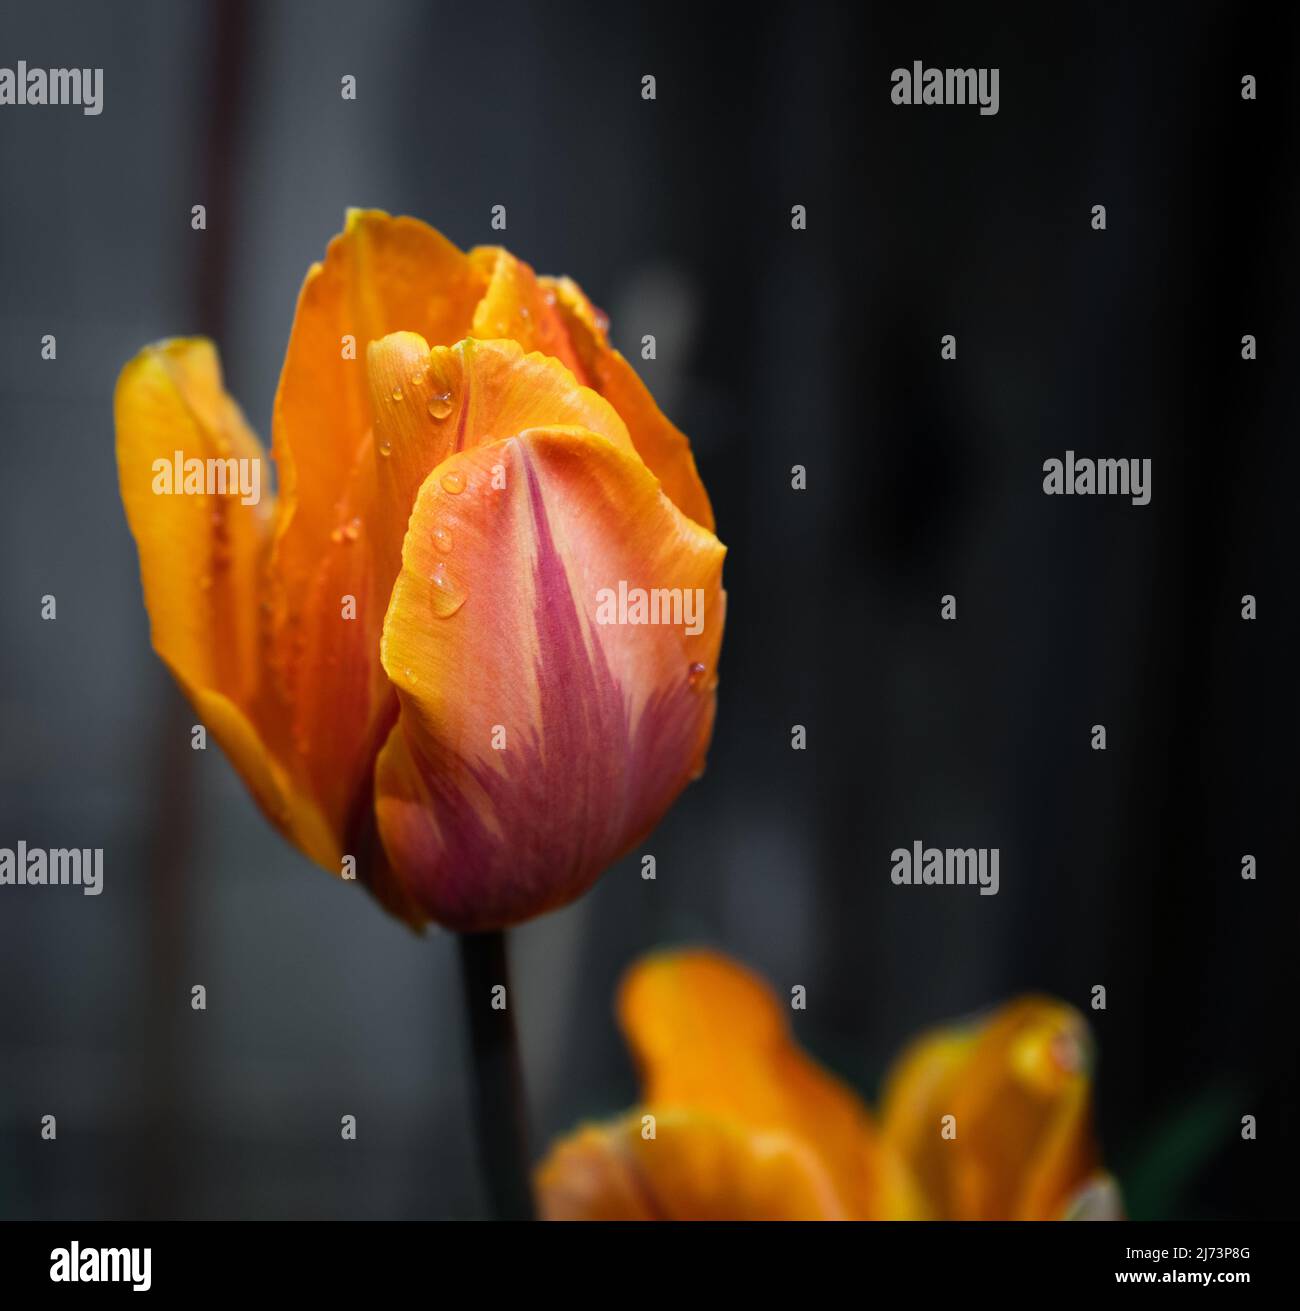 Orange Tulip isolated on dark background. Close up view of a single colourful tulip. Blurred background, nobody, selective focus Stock Photo